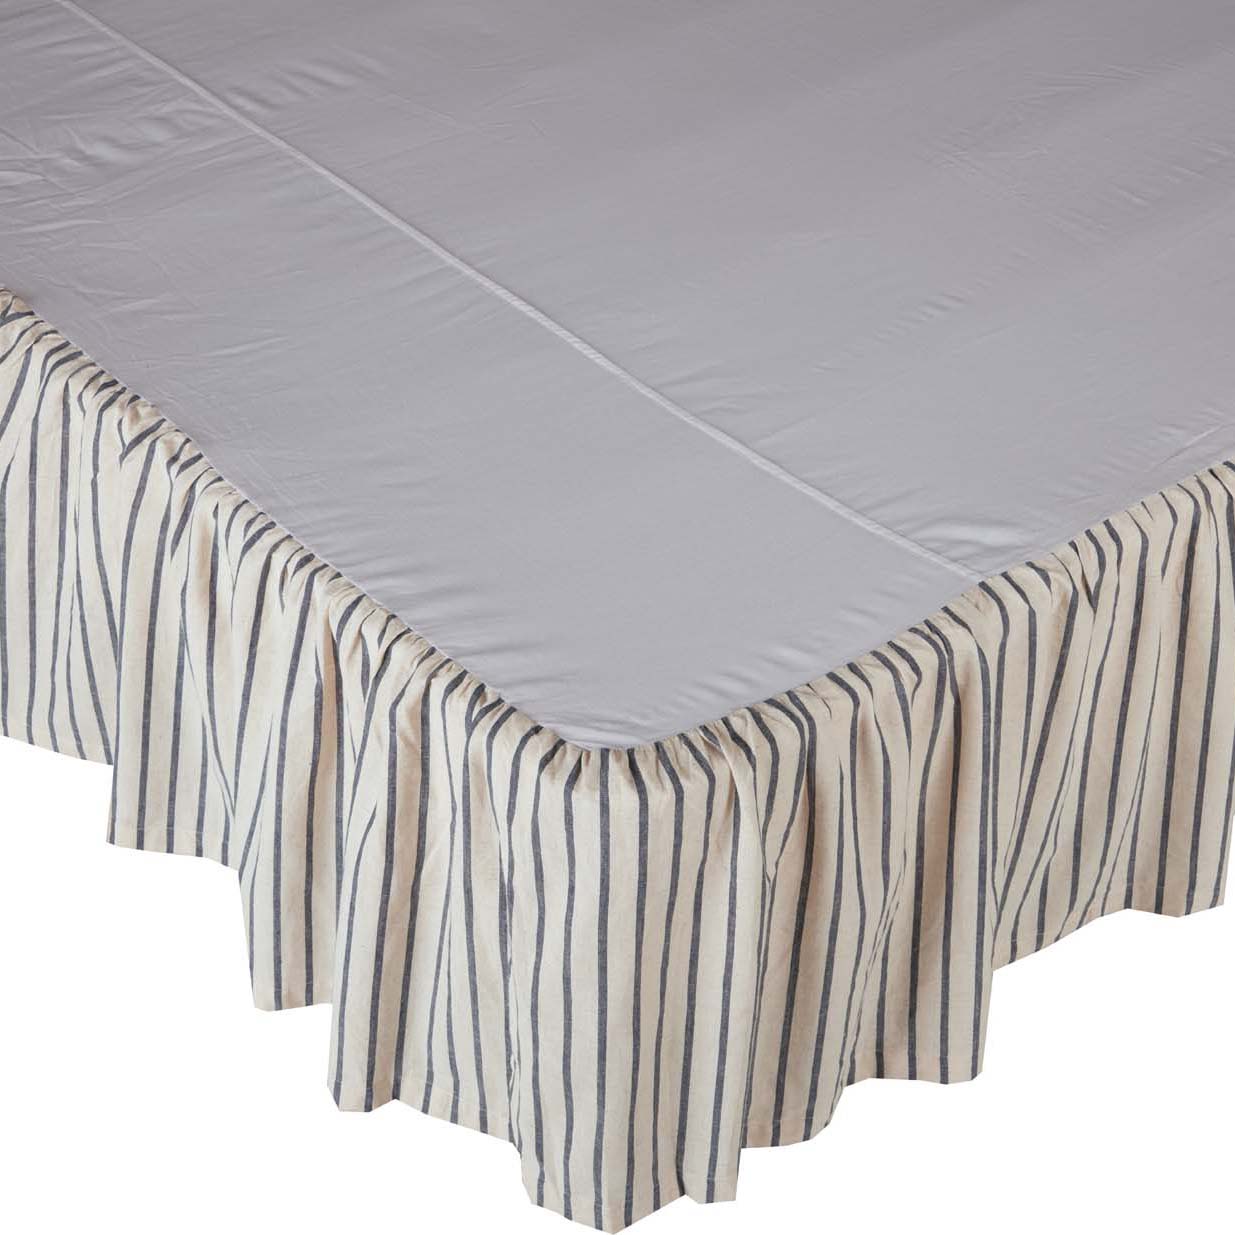 70132-Kaila-Queen-Bed-Skirt-60x80x16-image-4